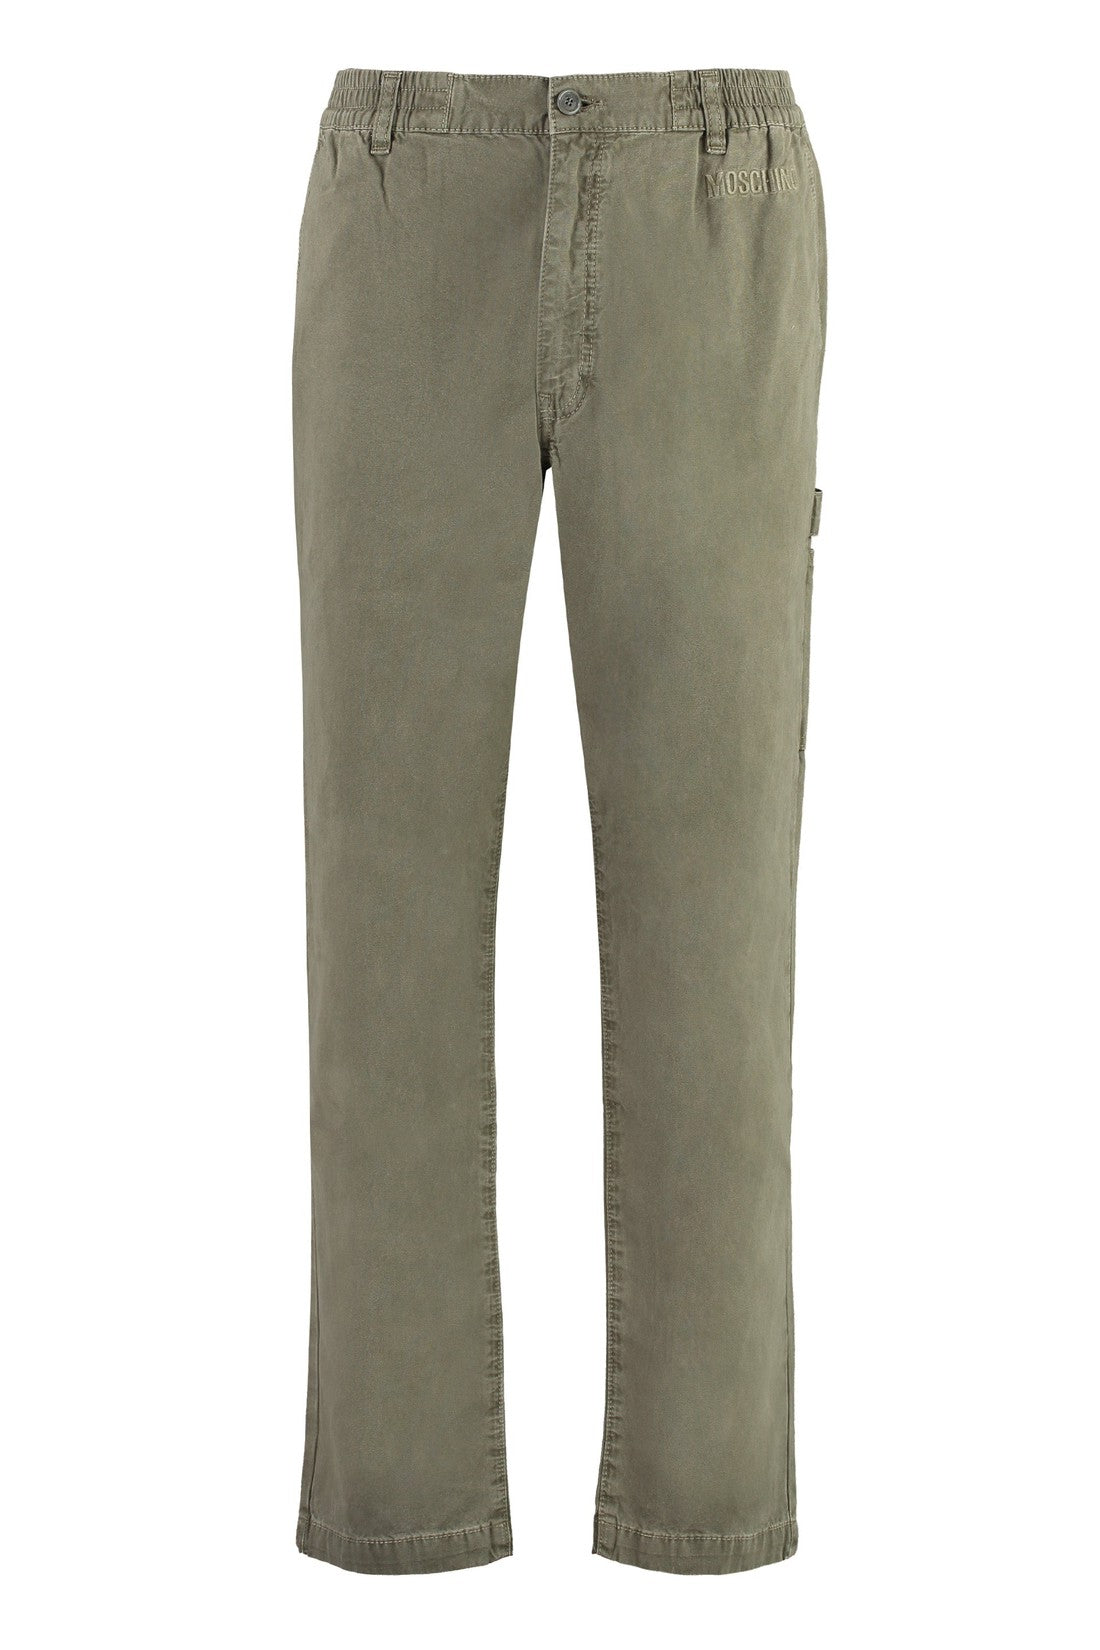 Moschino-OUTLET-SALE-Cotton trousers-ARCHIVIST